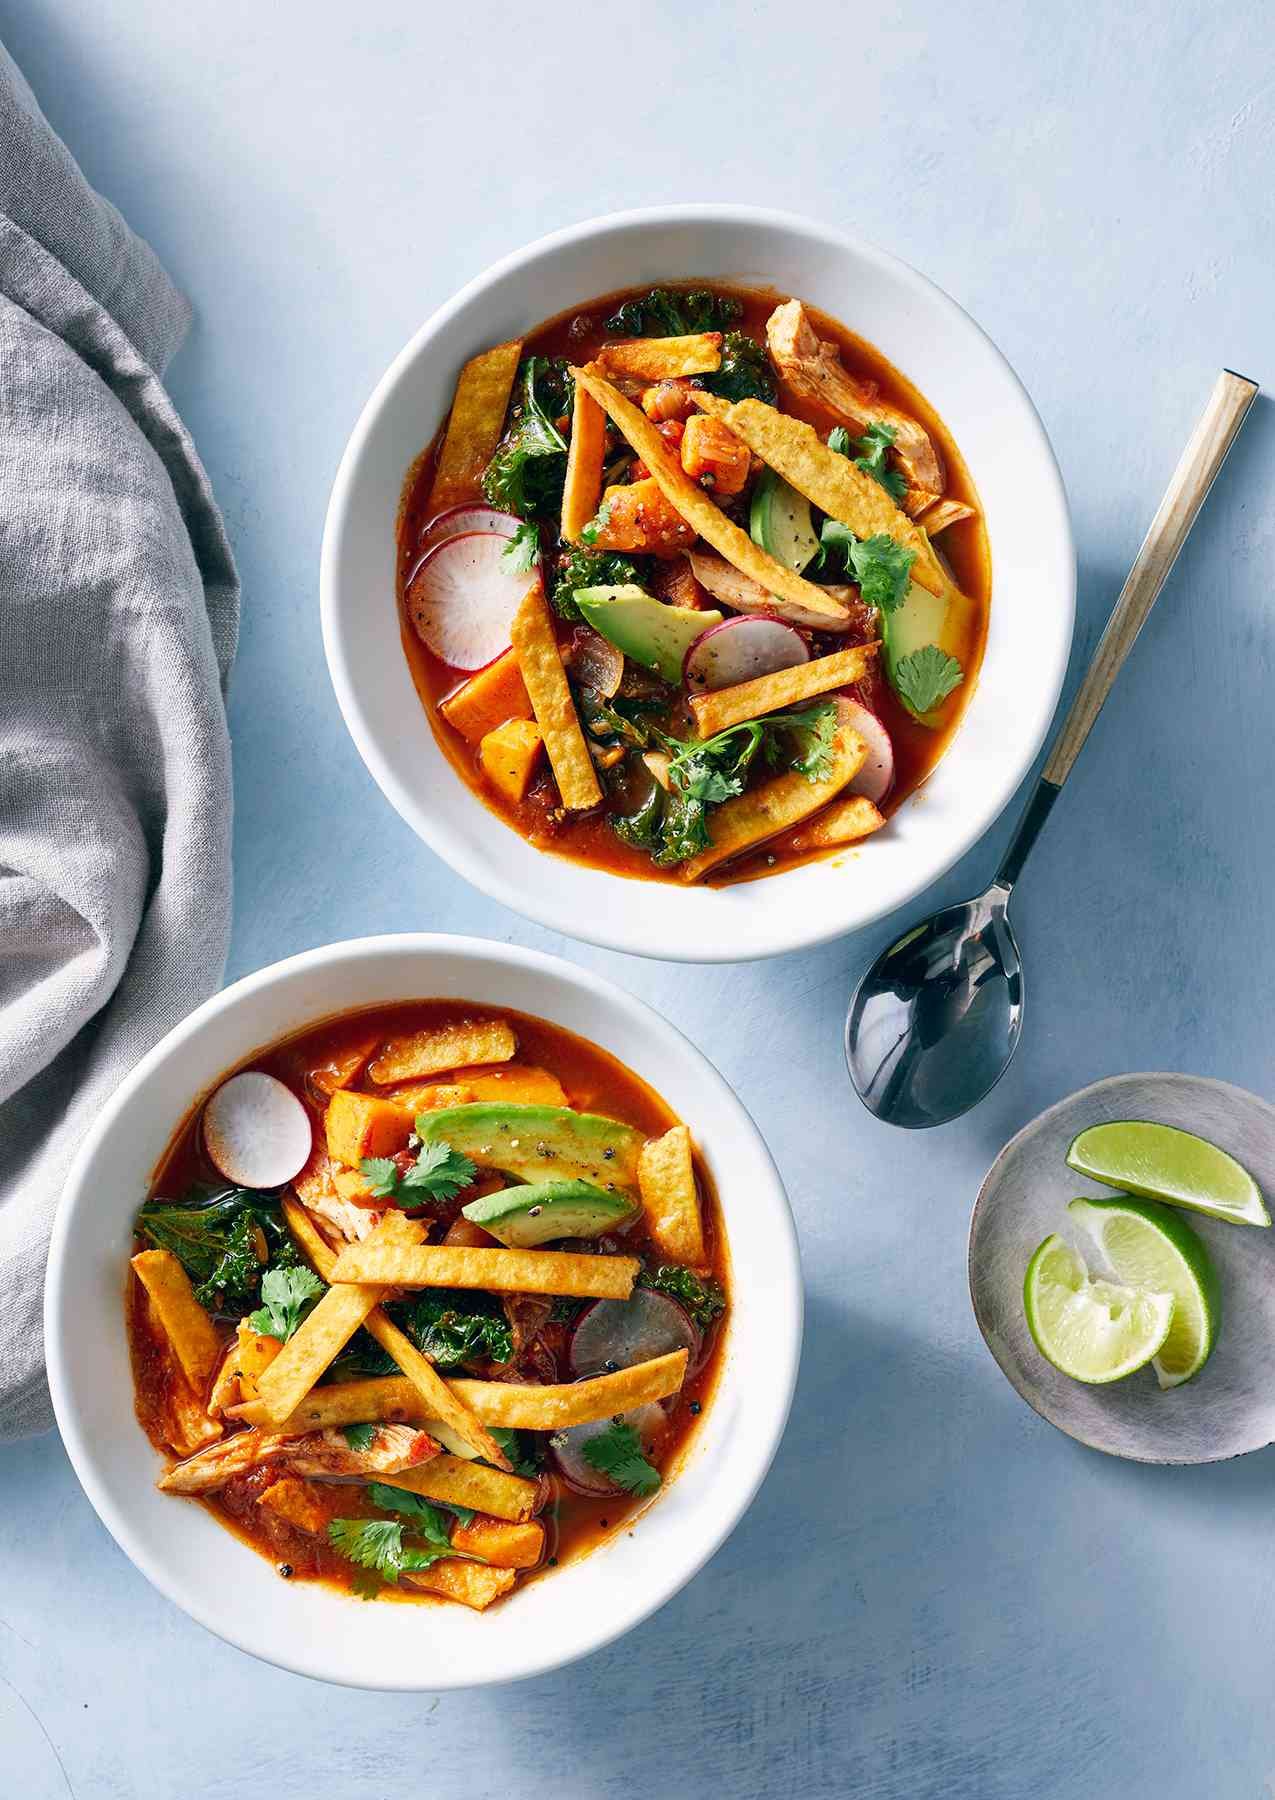 13 Vegetable Soup Recipes to Make Tonight - cover